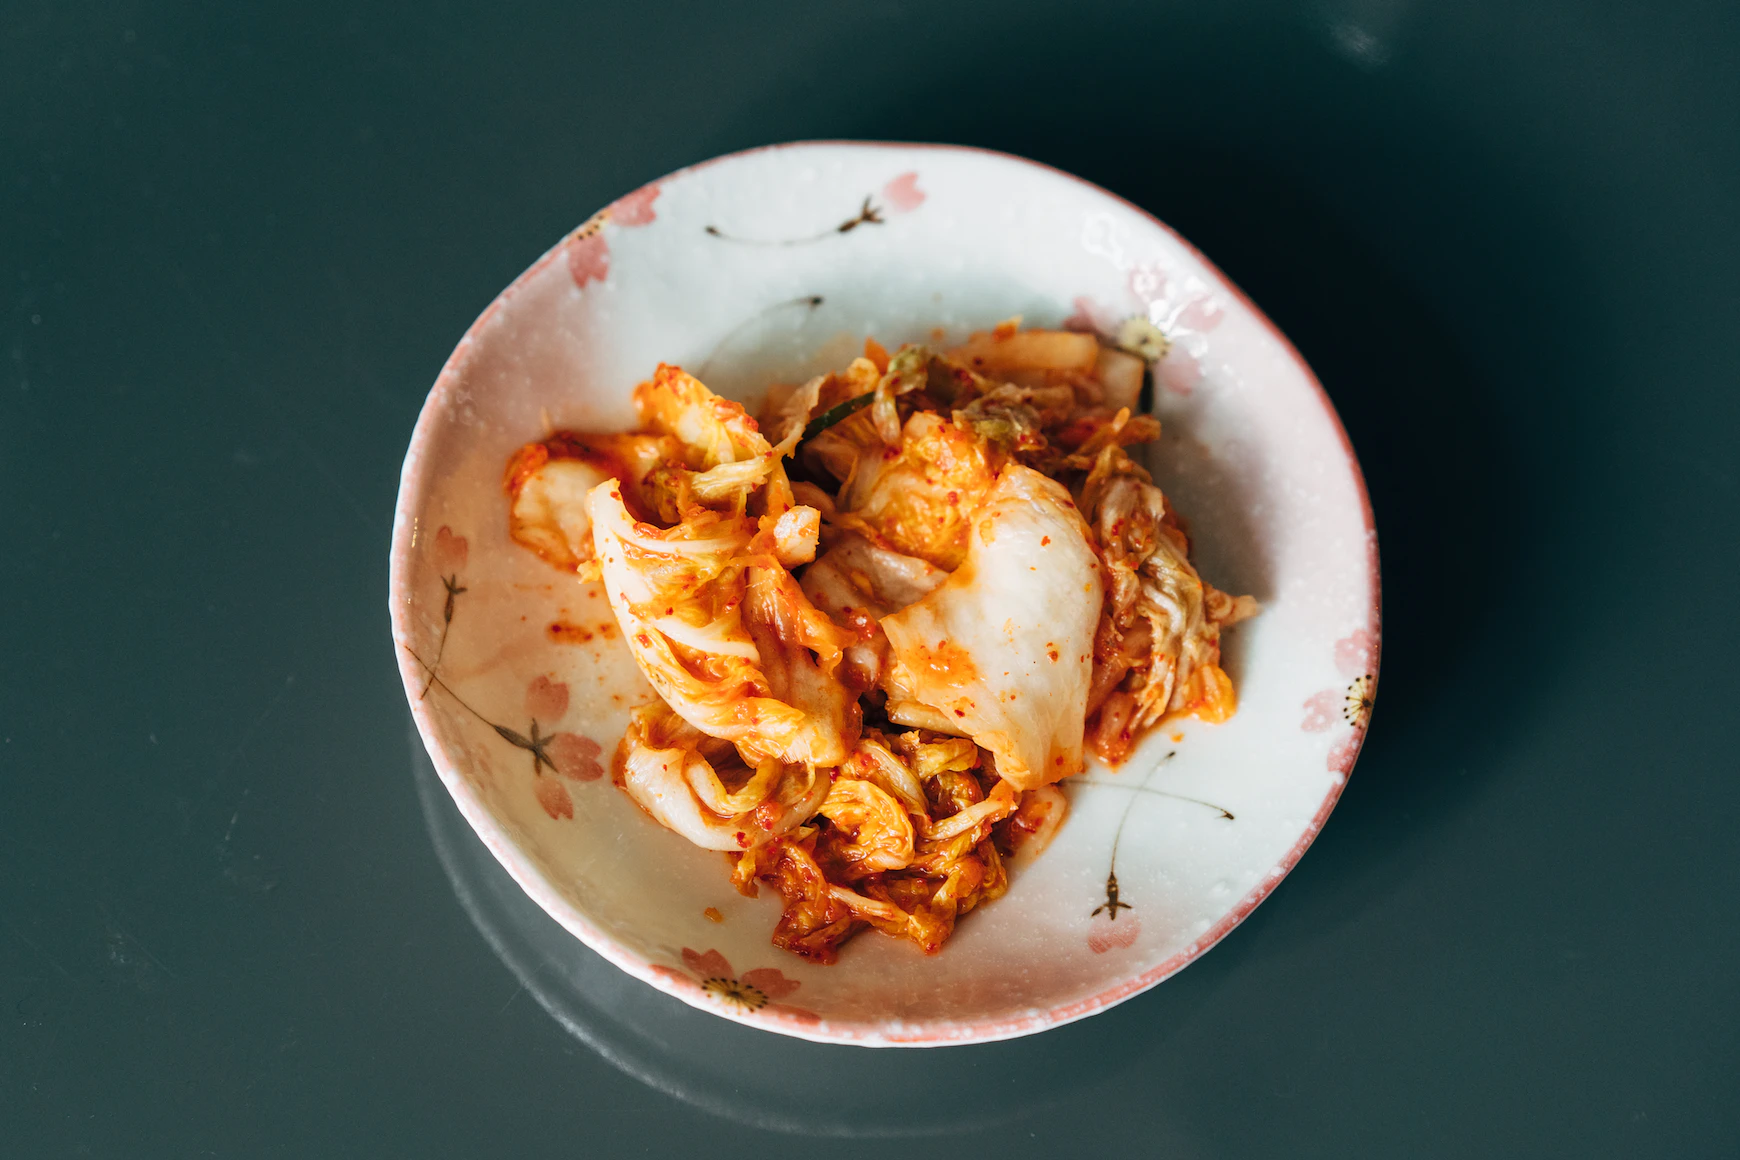 Kombucha to Kimchi: What Fermented Foods Are Best for Brain Health?